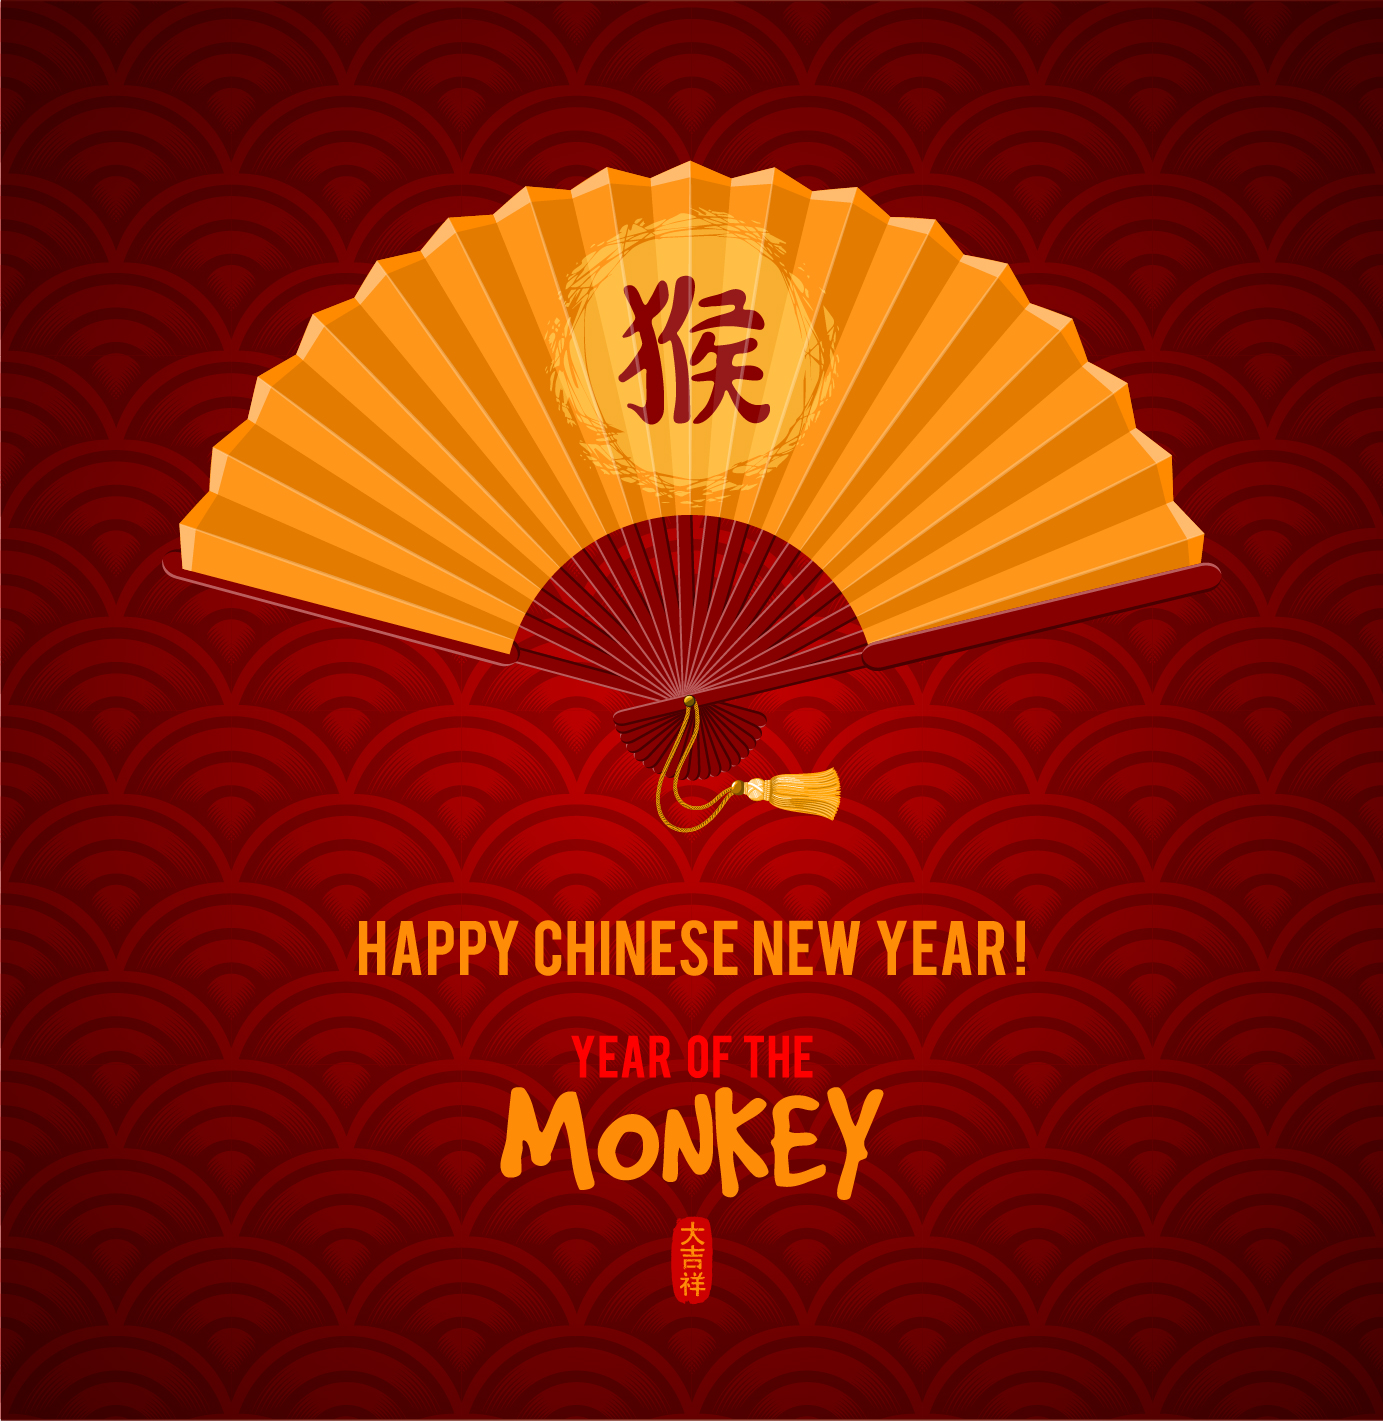 Golden fan with china 2016 monkey new year vector background year new monkey golden china background 2016   